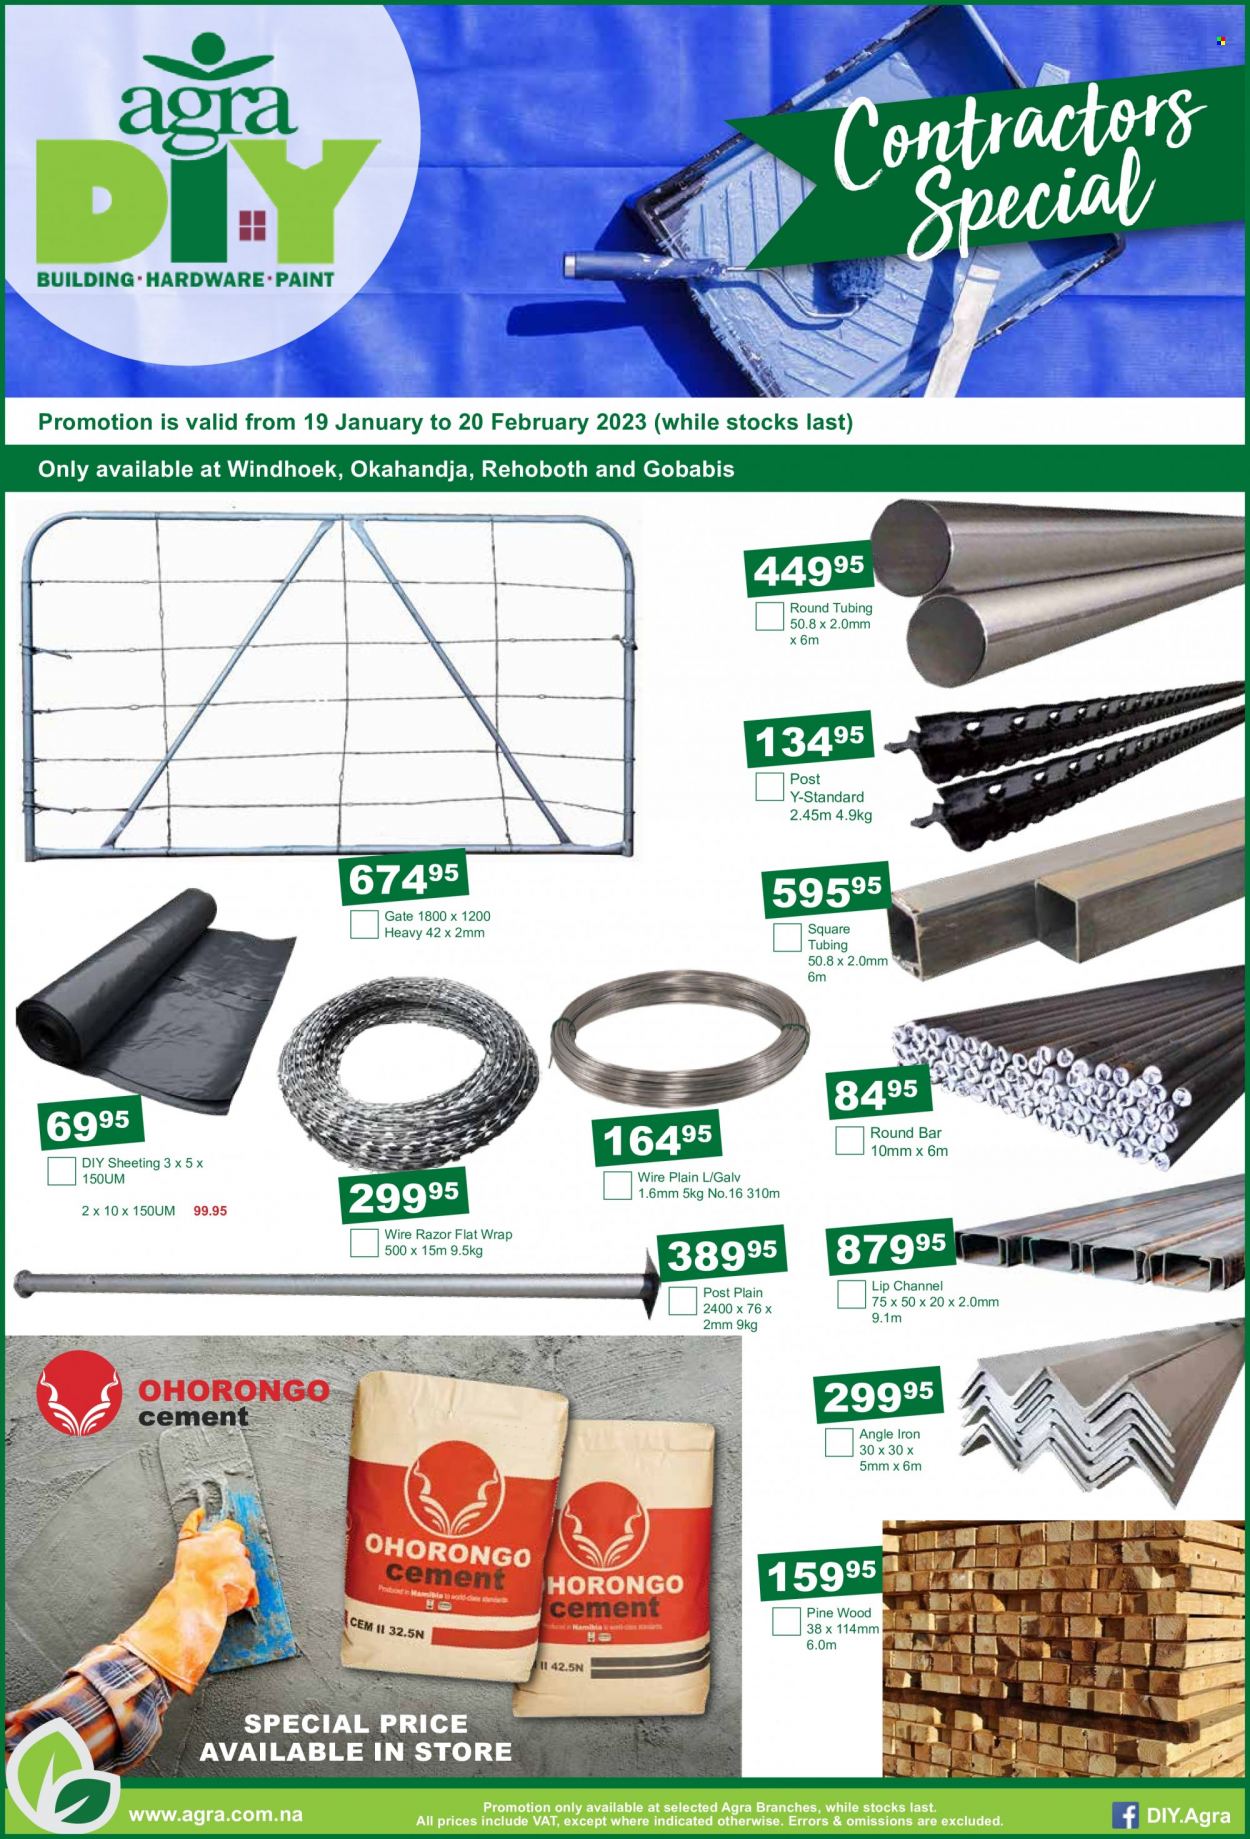 thumbnail - Agra catalogue  - 19/01/2023 - 20/02/2023 - Sales products - sheeting, paint. Page 2.